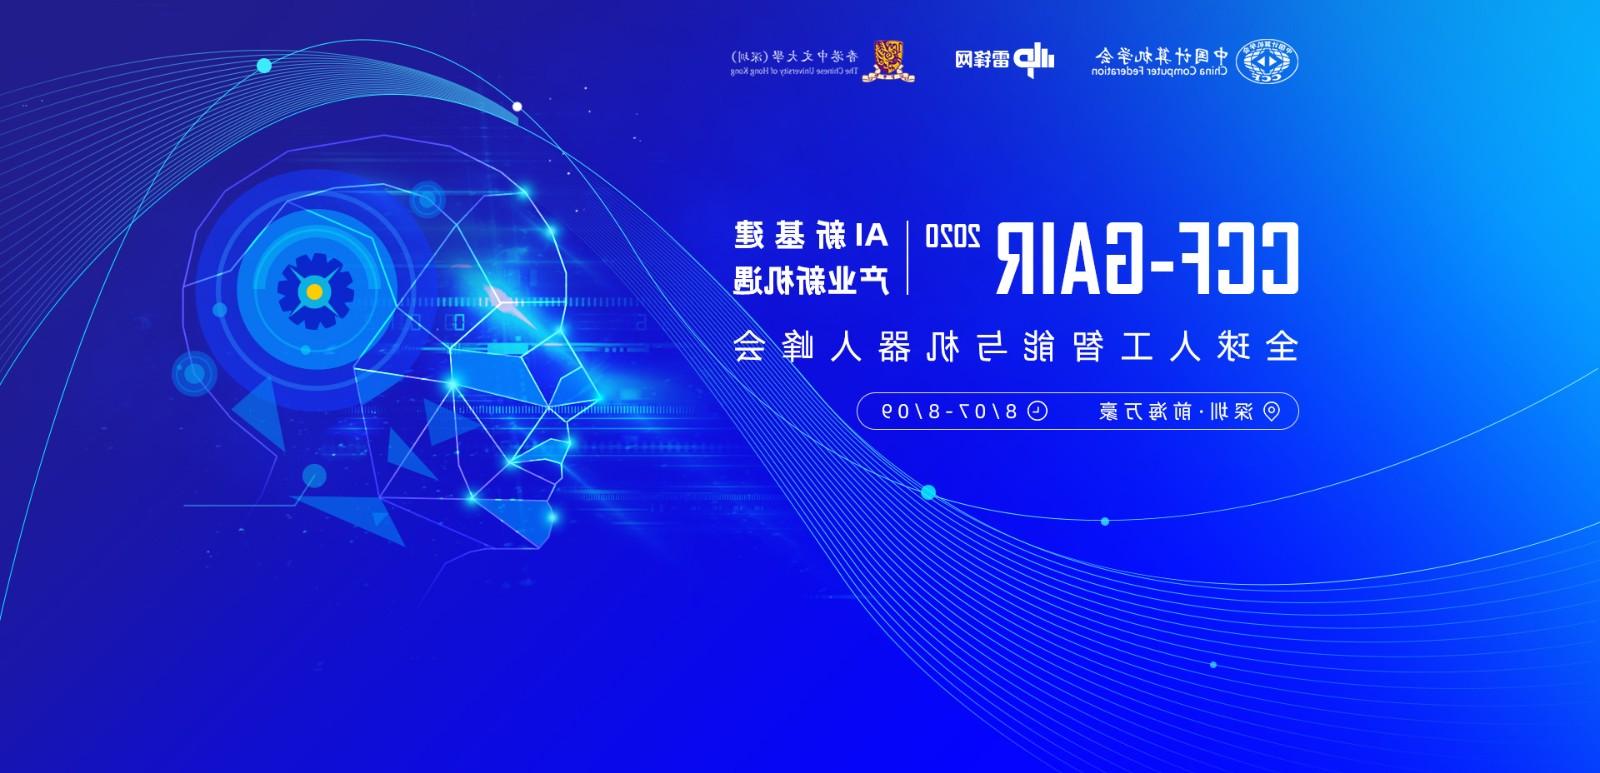 Saiyi Information was invited to attend the Global Artificial Intelligence and Robotics Summit on Au